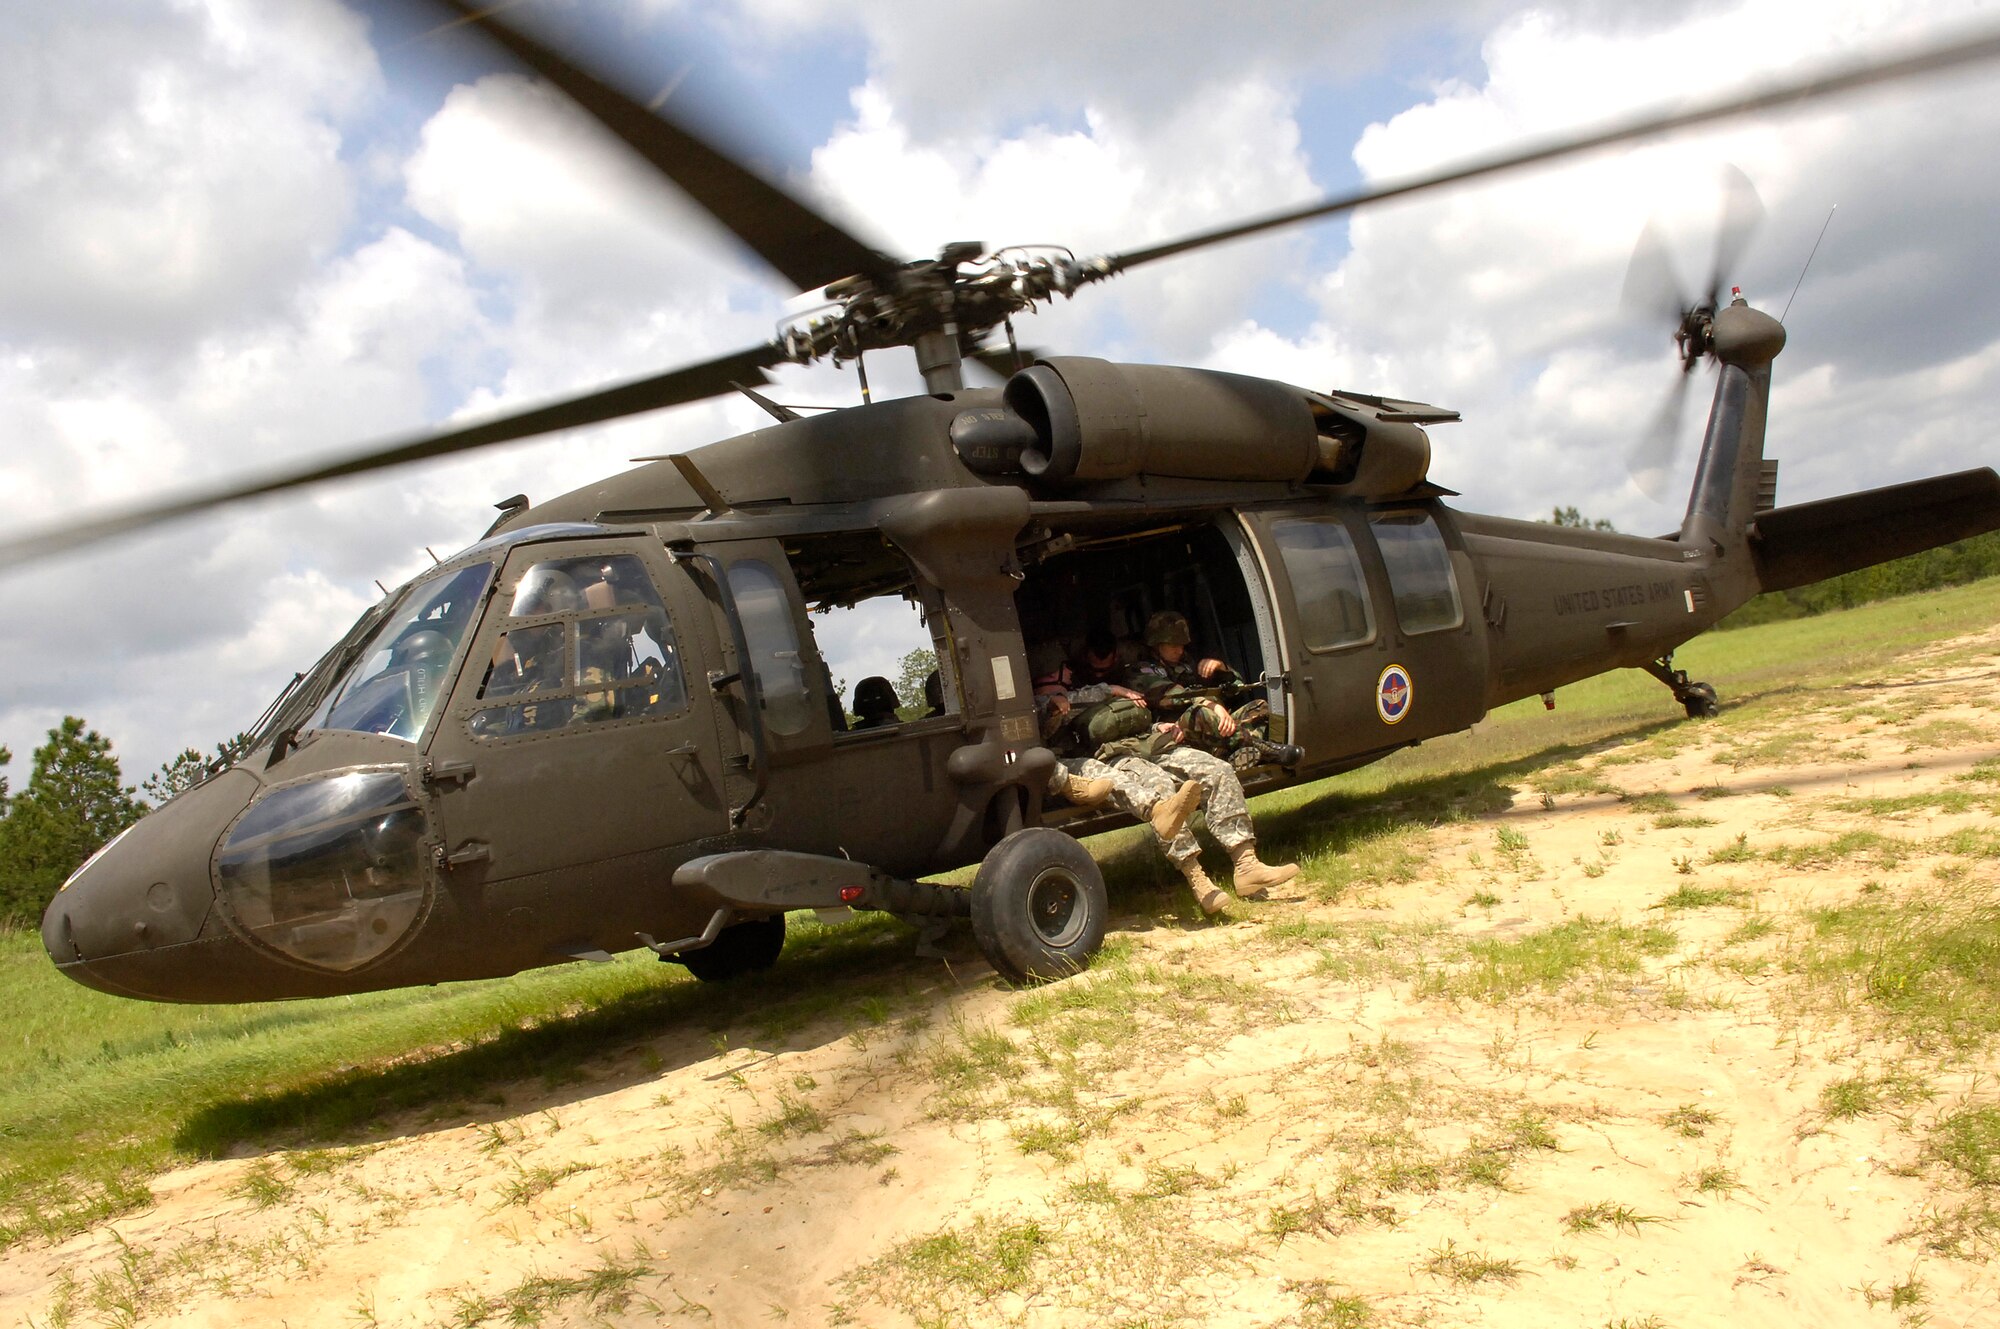 An Army UH-60 Blackhawk waits to take off from drop zone "Geronimo," located at the Joint Readiness Training Center at Fort Polk, La., on Wednesday, May 3, 2006. Special operations Soldiers, along with an Air Force survival, evasion, resistance and escape specialist, completed static-line parachute training. (U.S. Air Force photo/Senior Airman Stephen J. Otero)